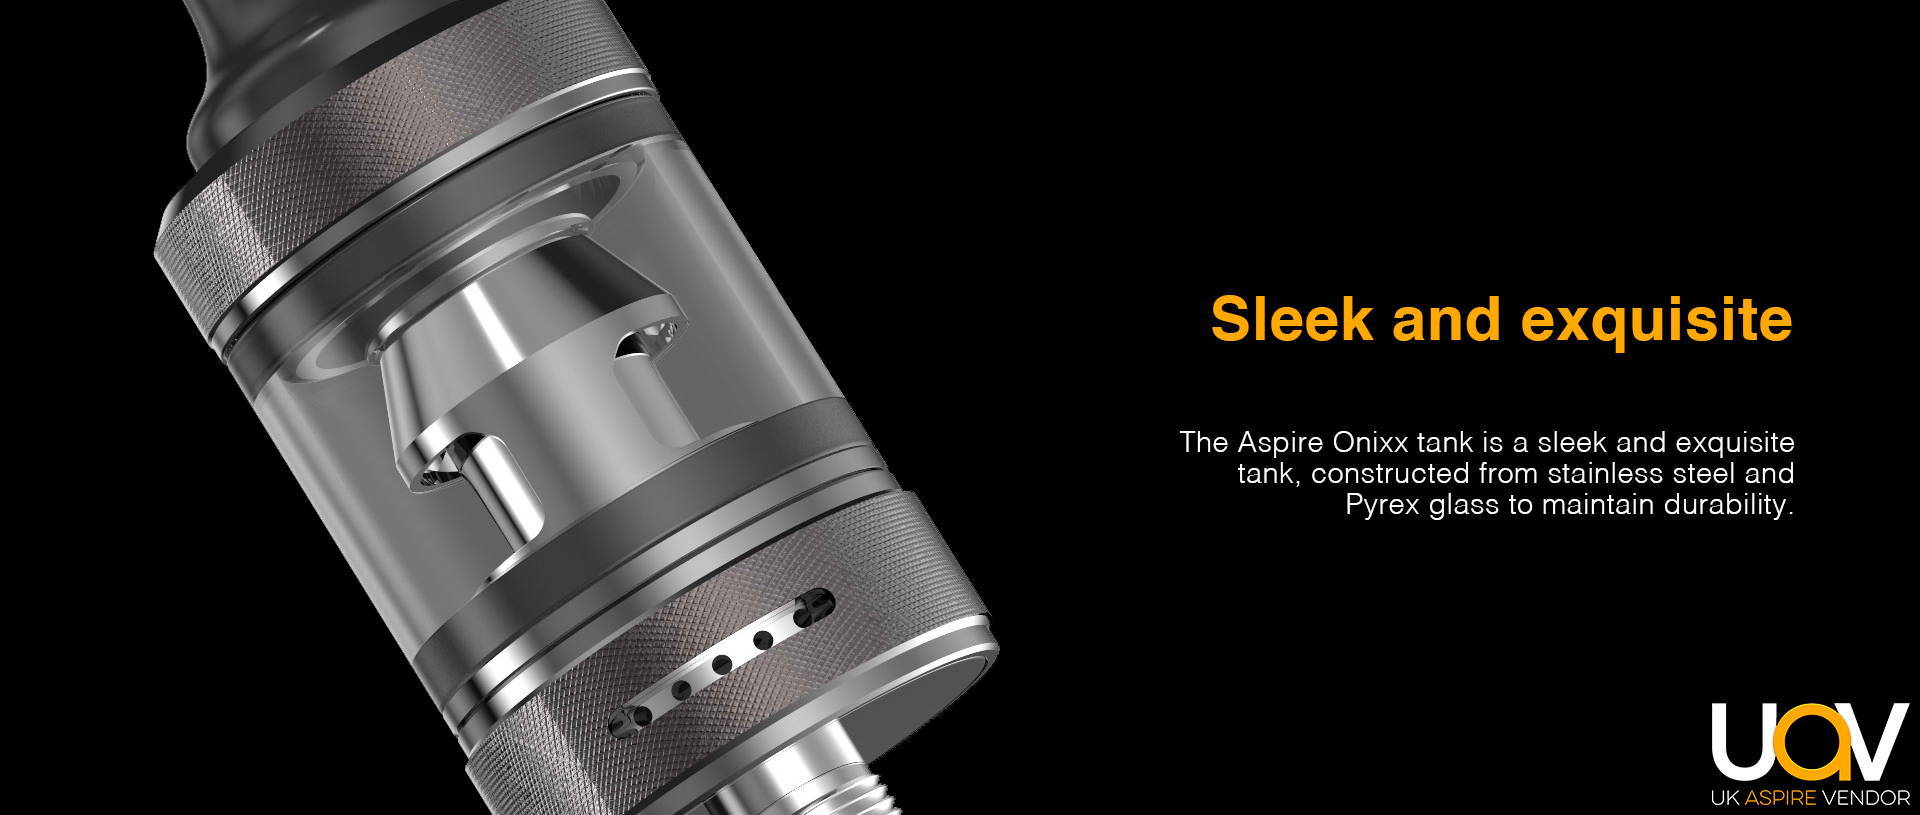 Sleek and Exquisite  Aspire Onixx tank is a sleek and exquisite tank, constructed from stainless steel and Pyrex glass to maintain durability.